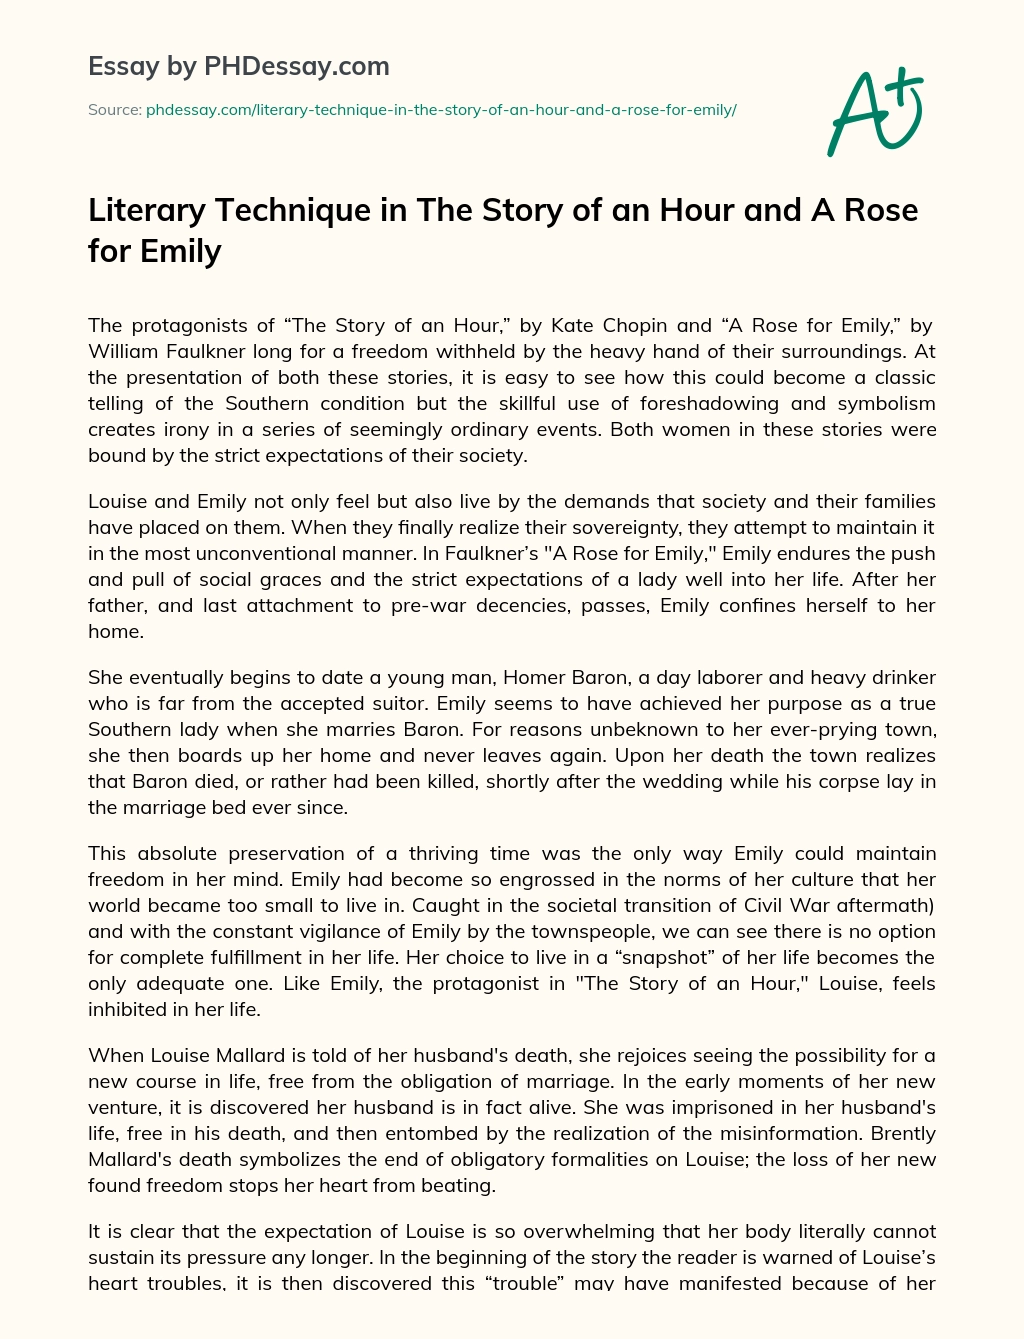 Literary Technique in The Story of an Hour and A Rose for Emily essay